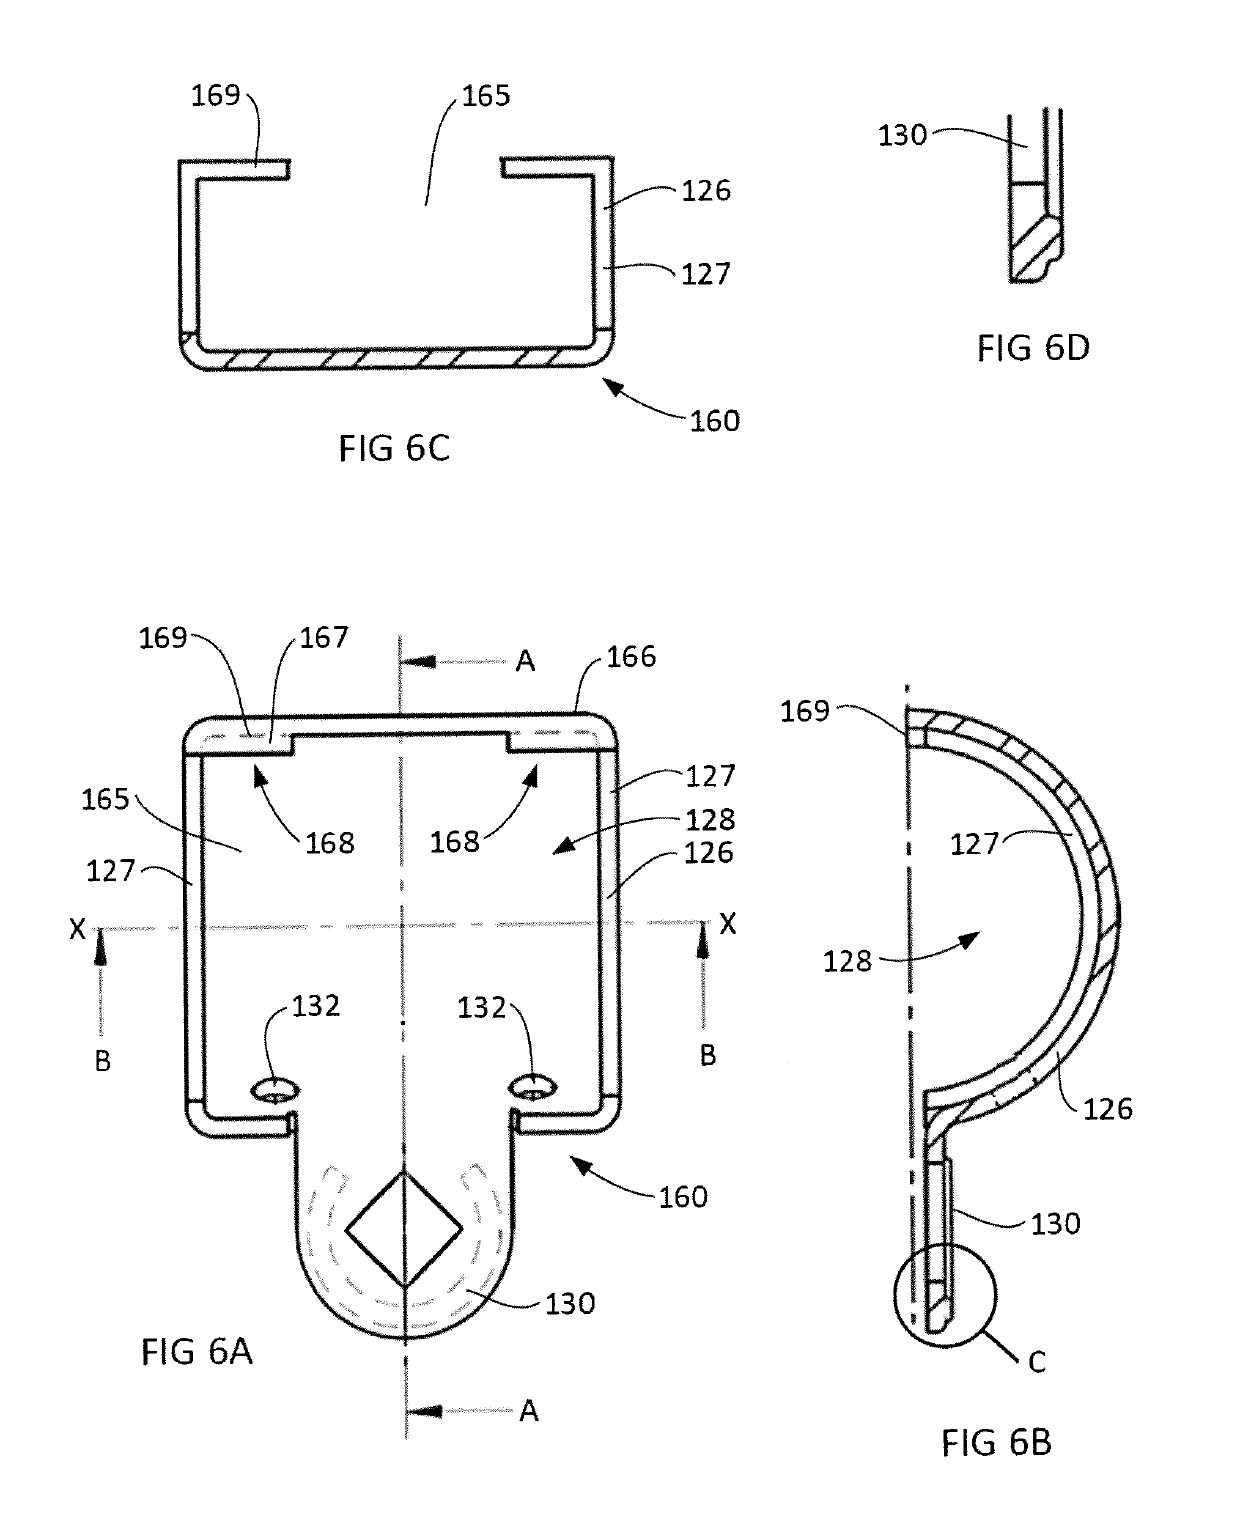 Mounting fixture of a connection fixture